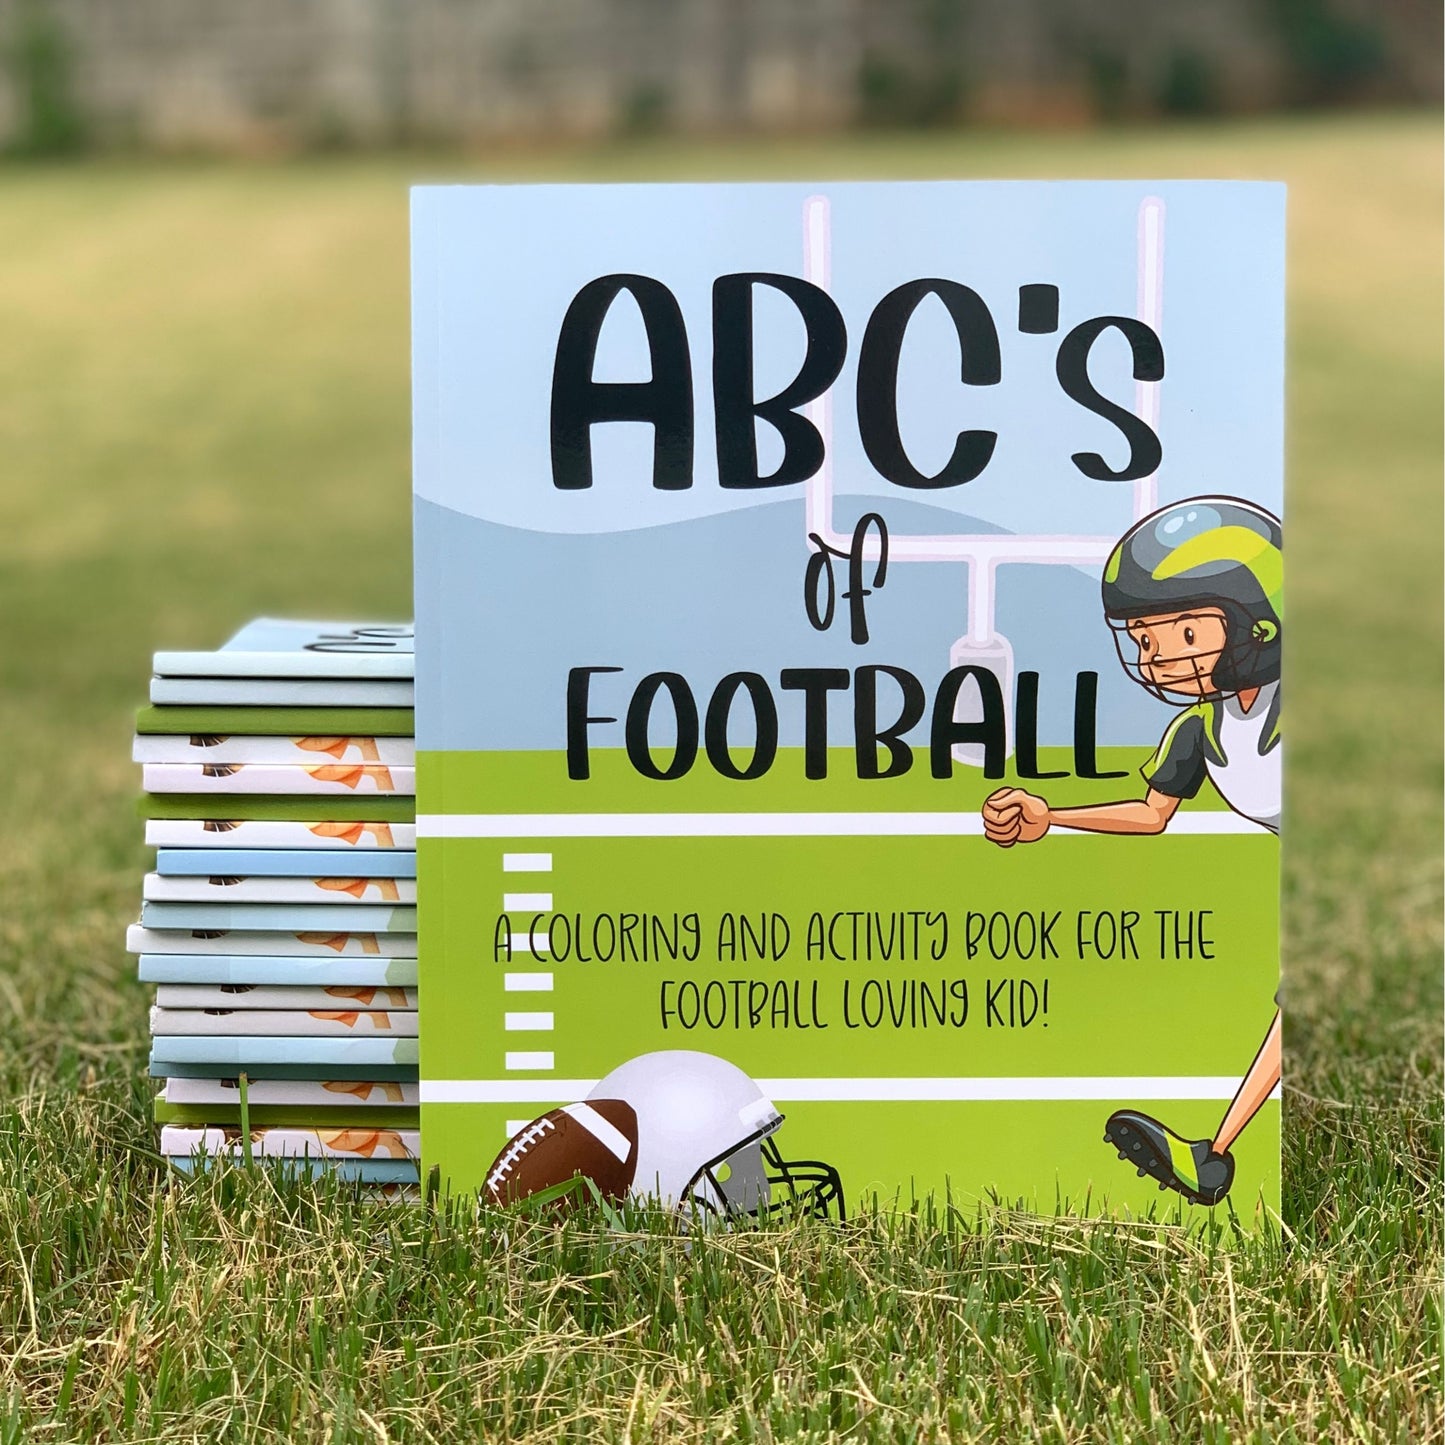 ABC's of Football: A Coloring and Activity Book for the Football-Loving Kid